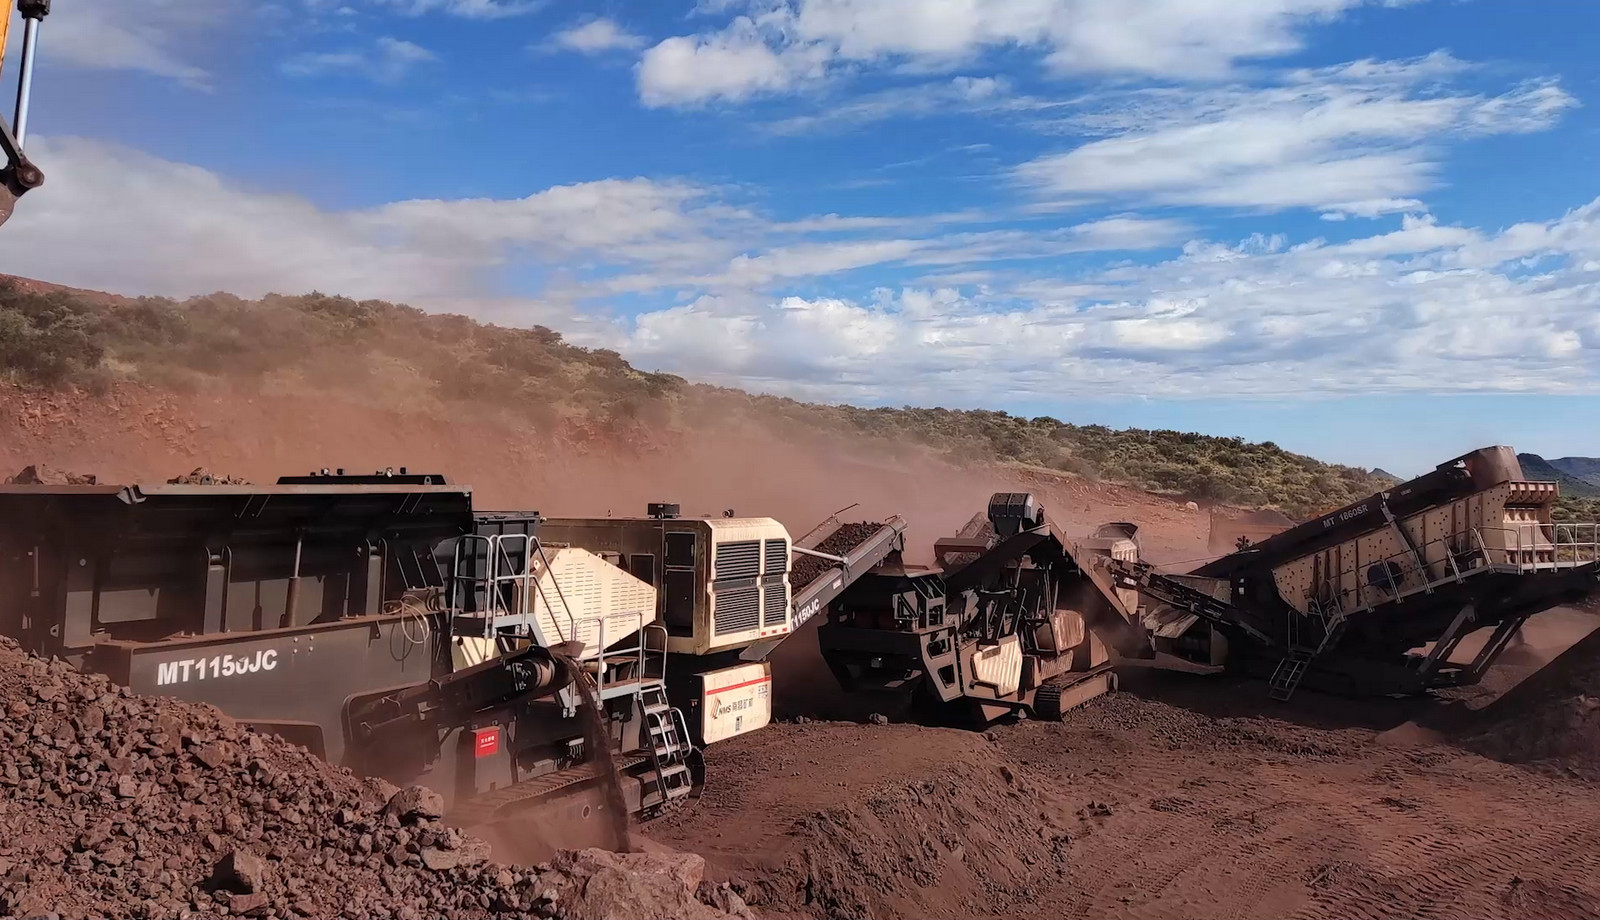 NMS Tracked Mobile Crushing & Screening Plants Assist a Metal Mine Project in South Africa